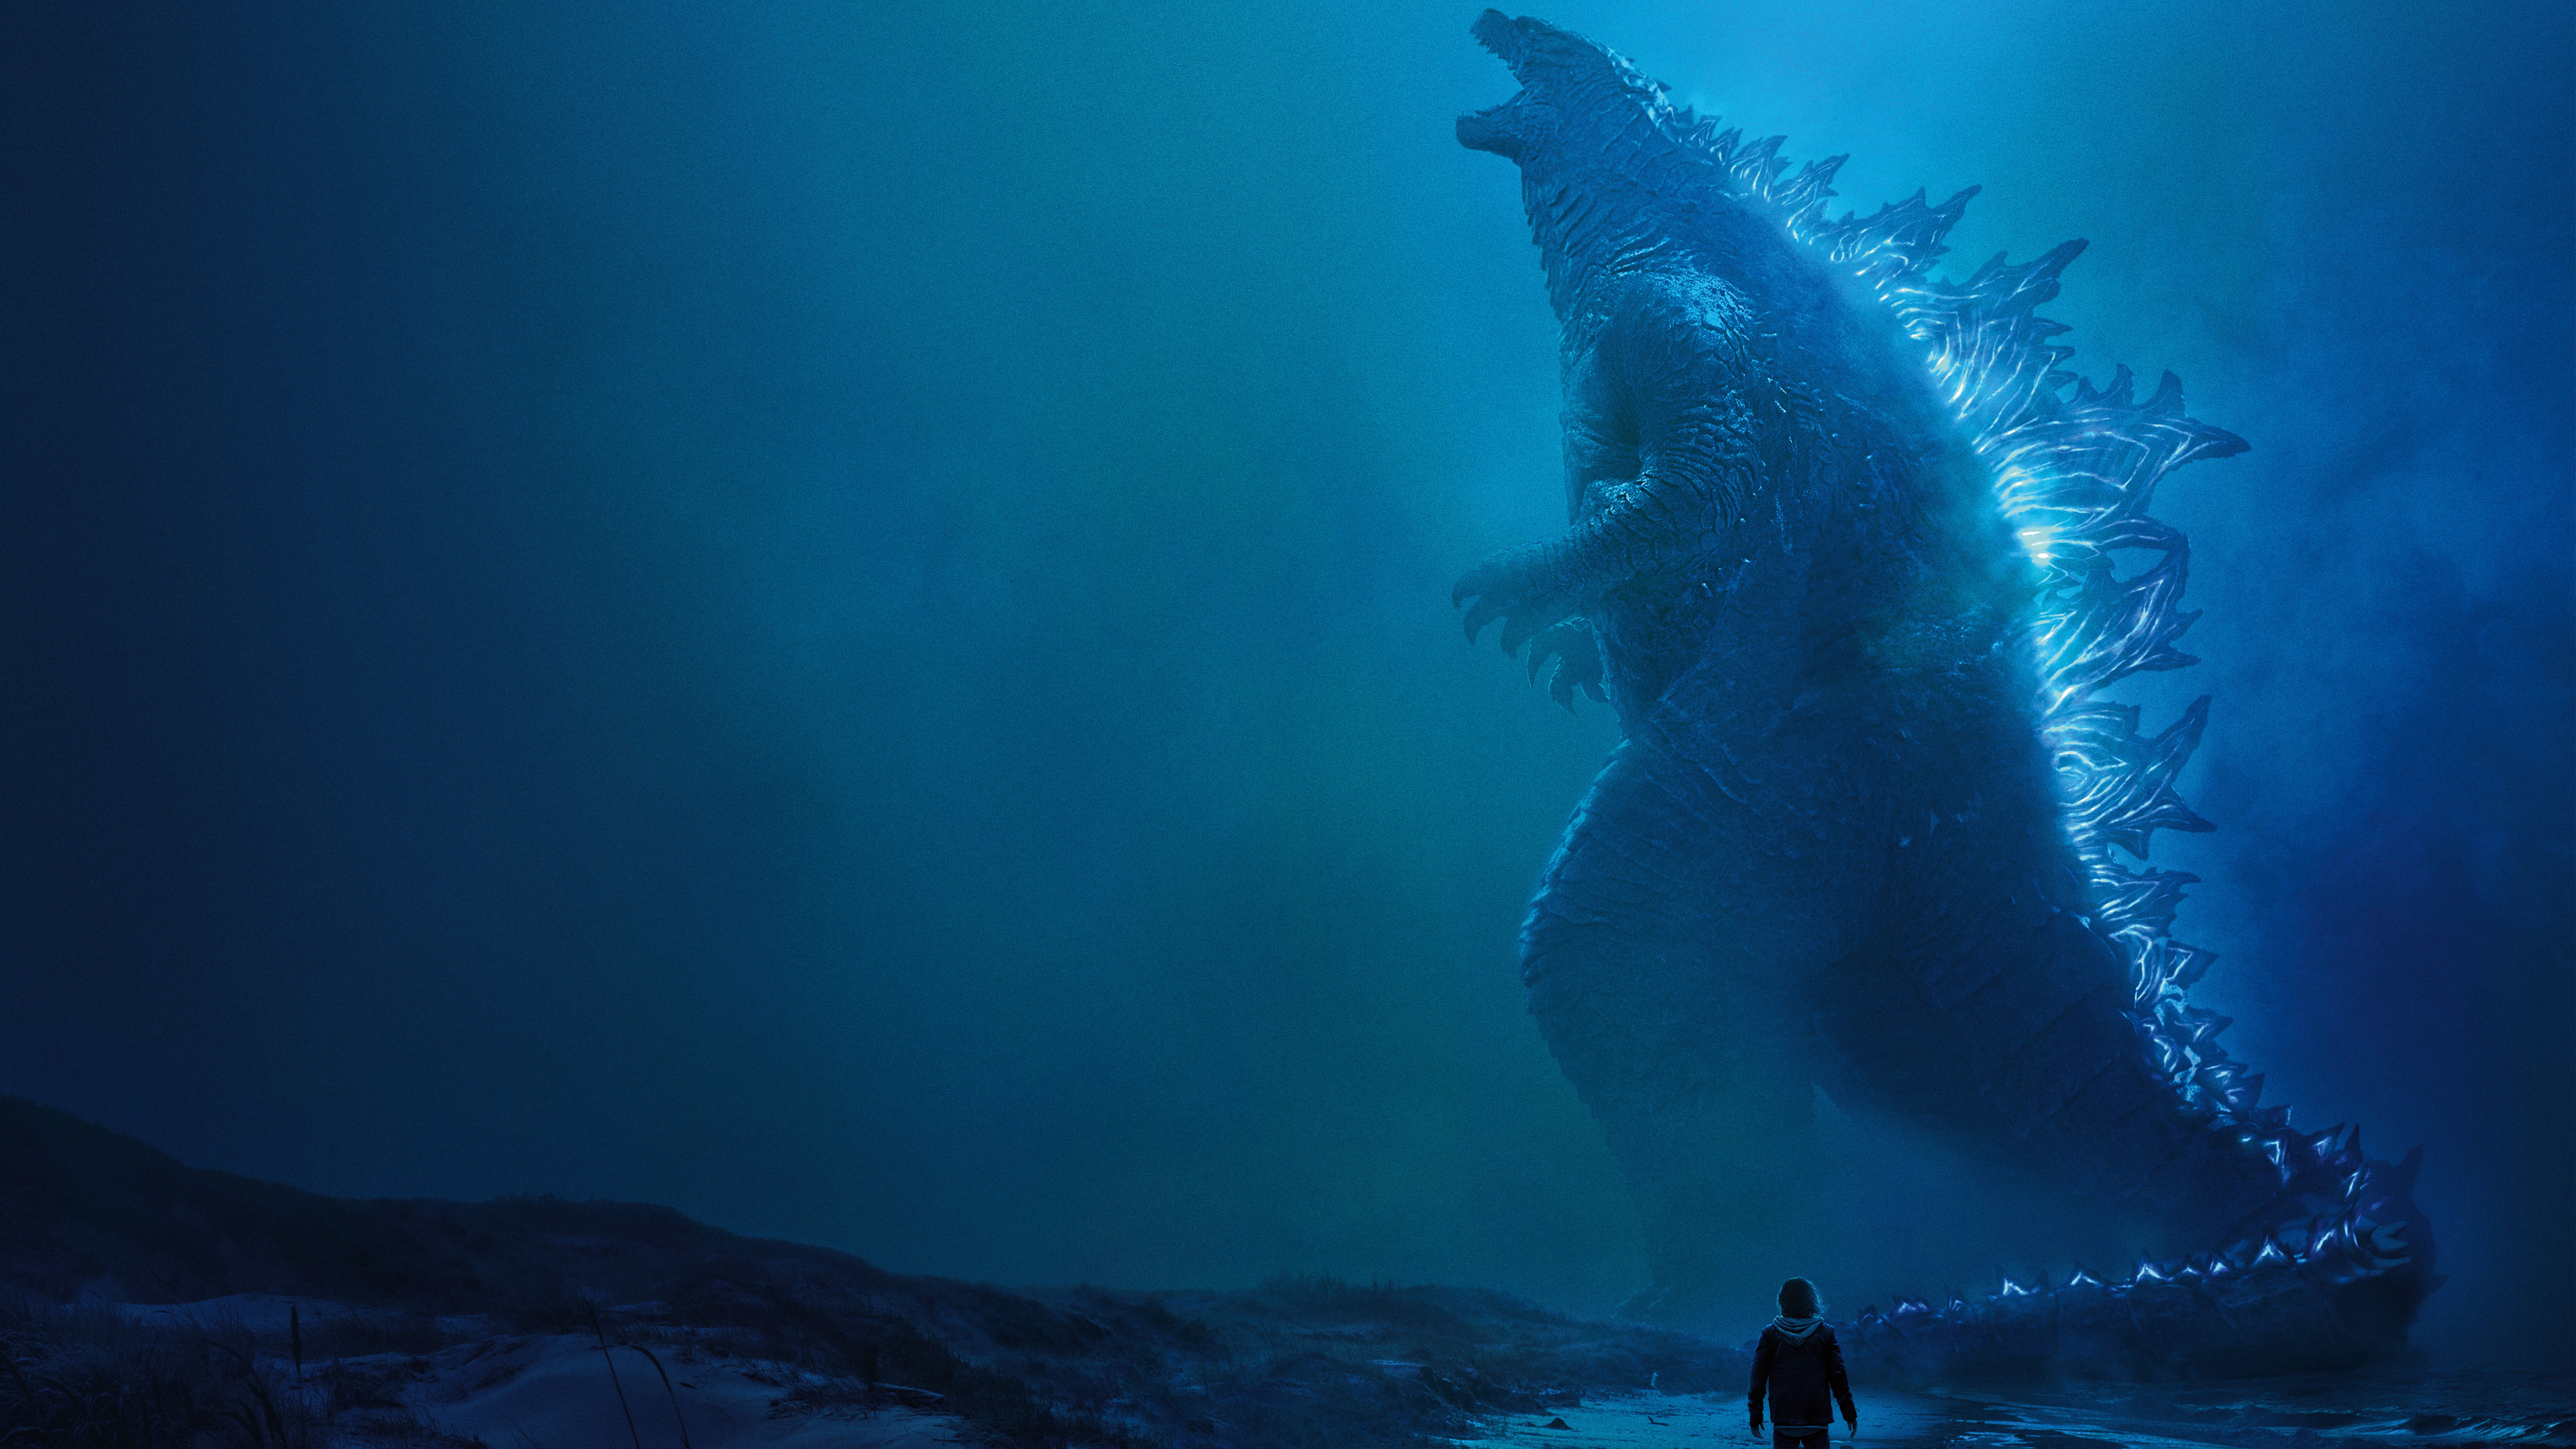 Godzilla King Of The Monsters 8k 8k HD 4k Wallpaper, Image, Background, Photo and Picture